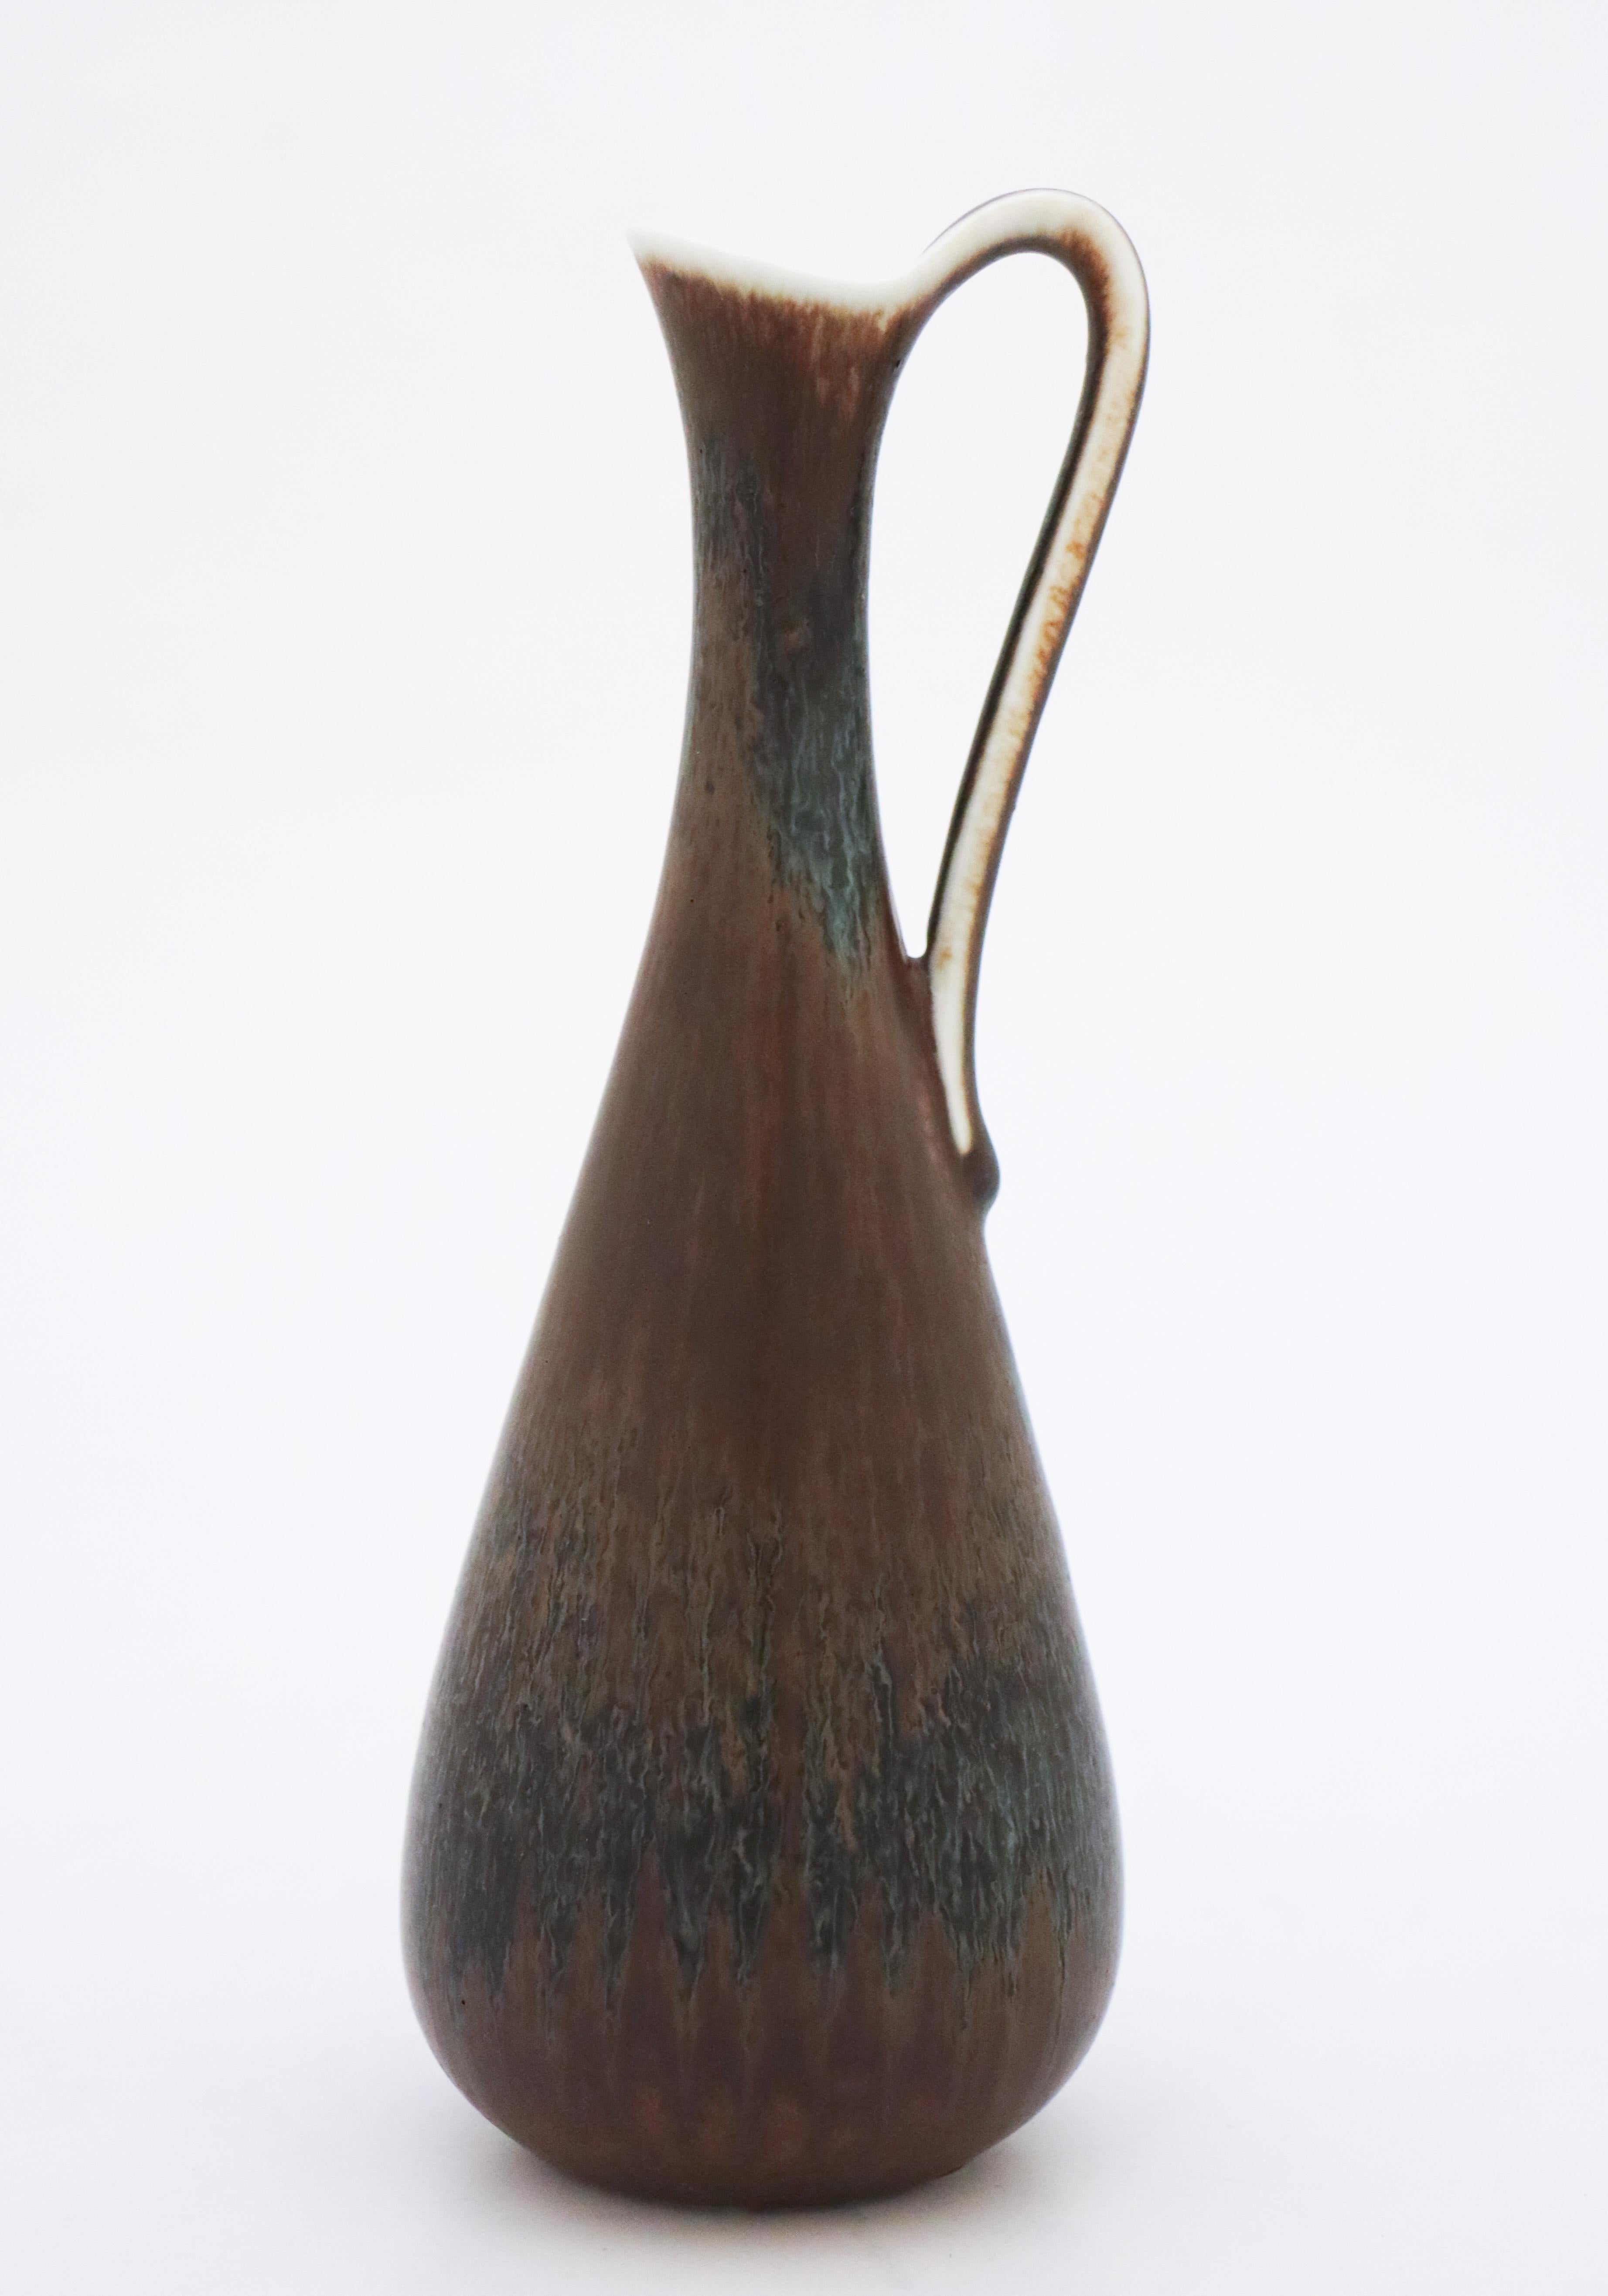 A lovely black and brown vase with handle designed by Gunnar Nylund at Rörstrand, it´s 20.5 cm high and it has a lovely brown & black har fur glaze, it´s in excellent condition and marked as 1:st quality.

Gunnar Nylund was born in Paris 1904 with